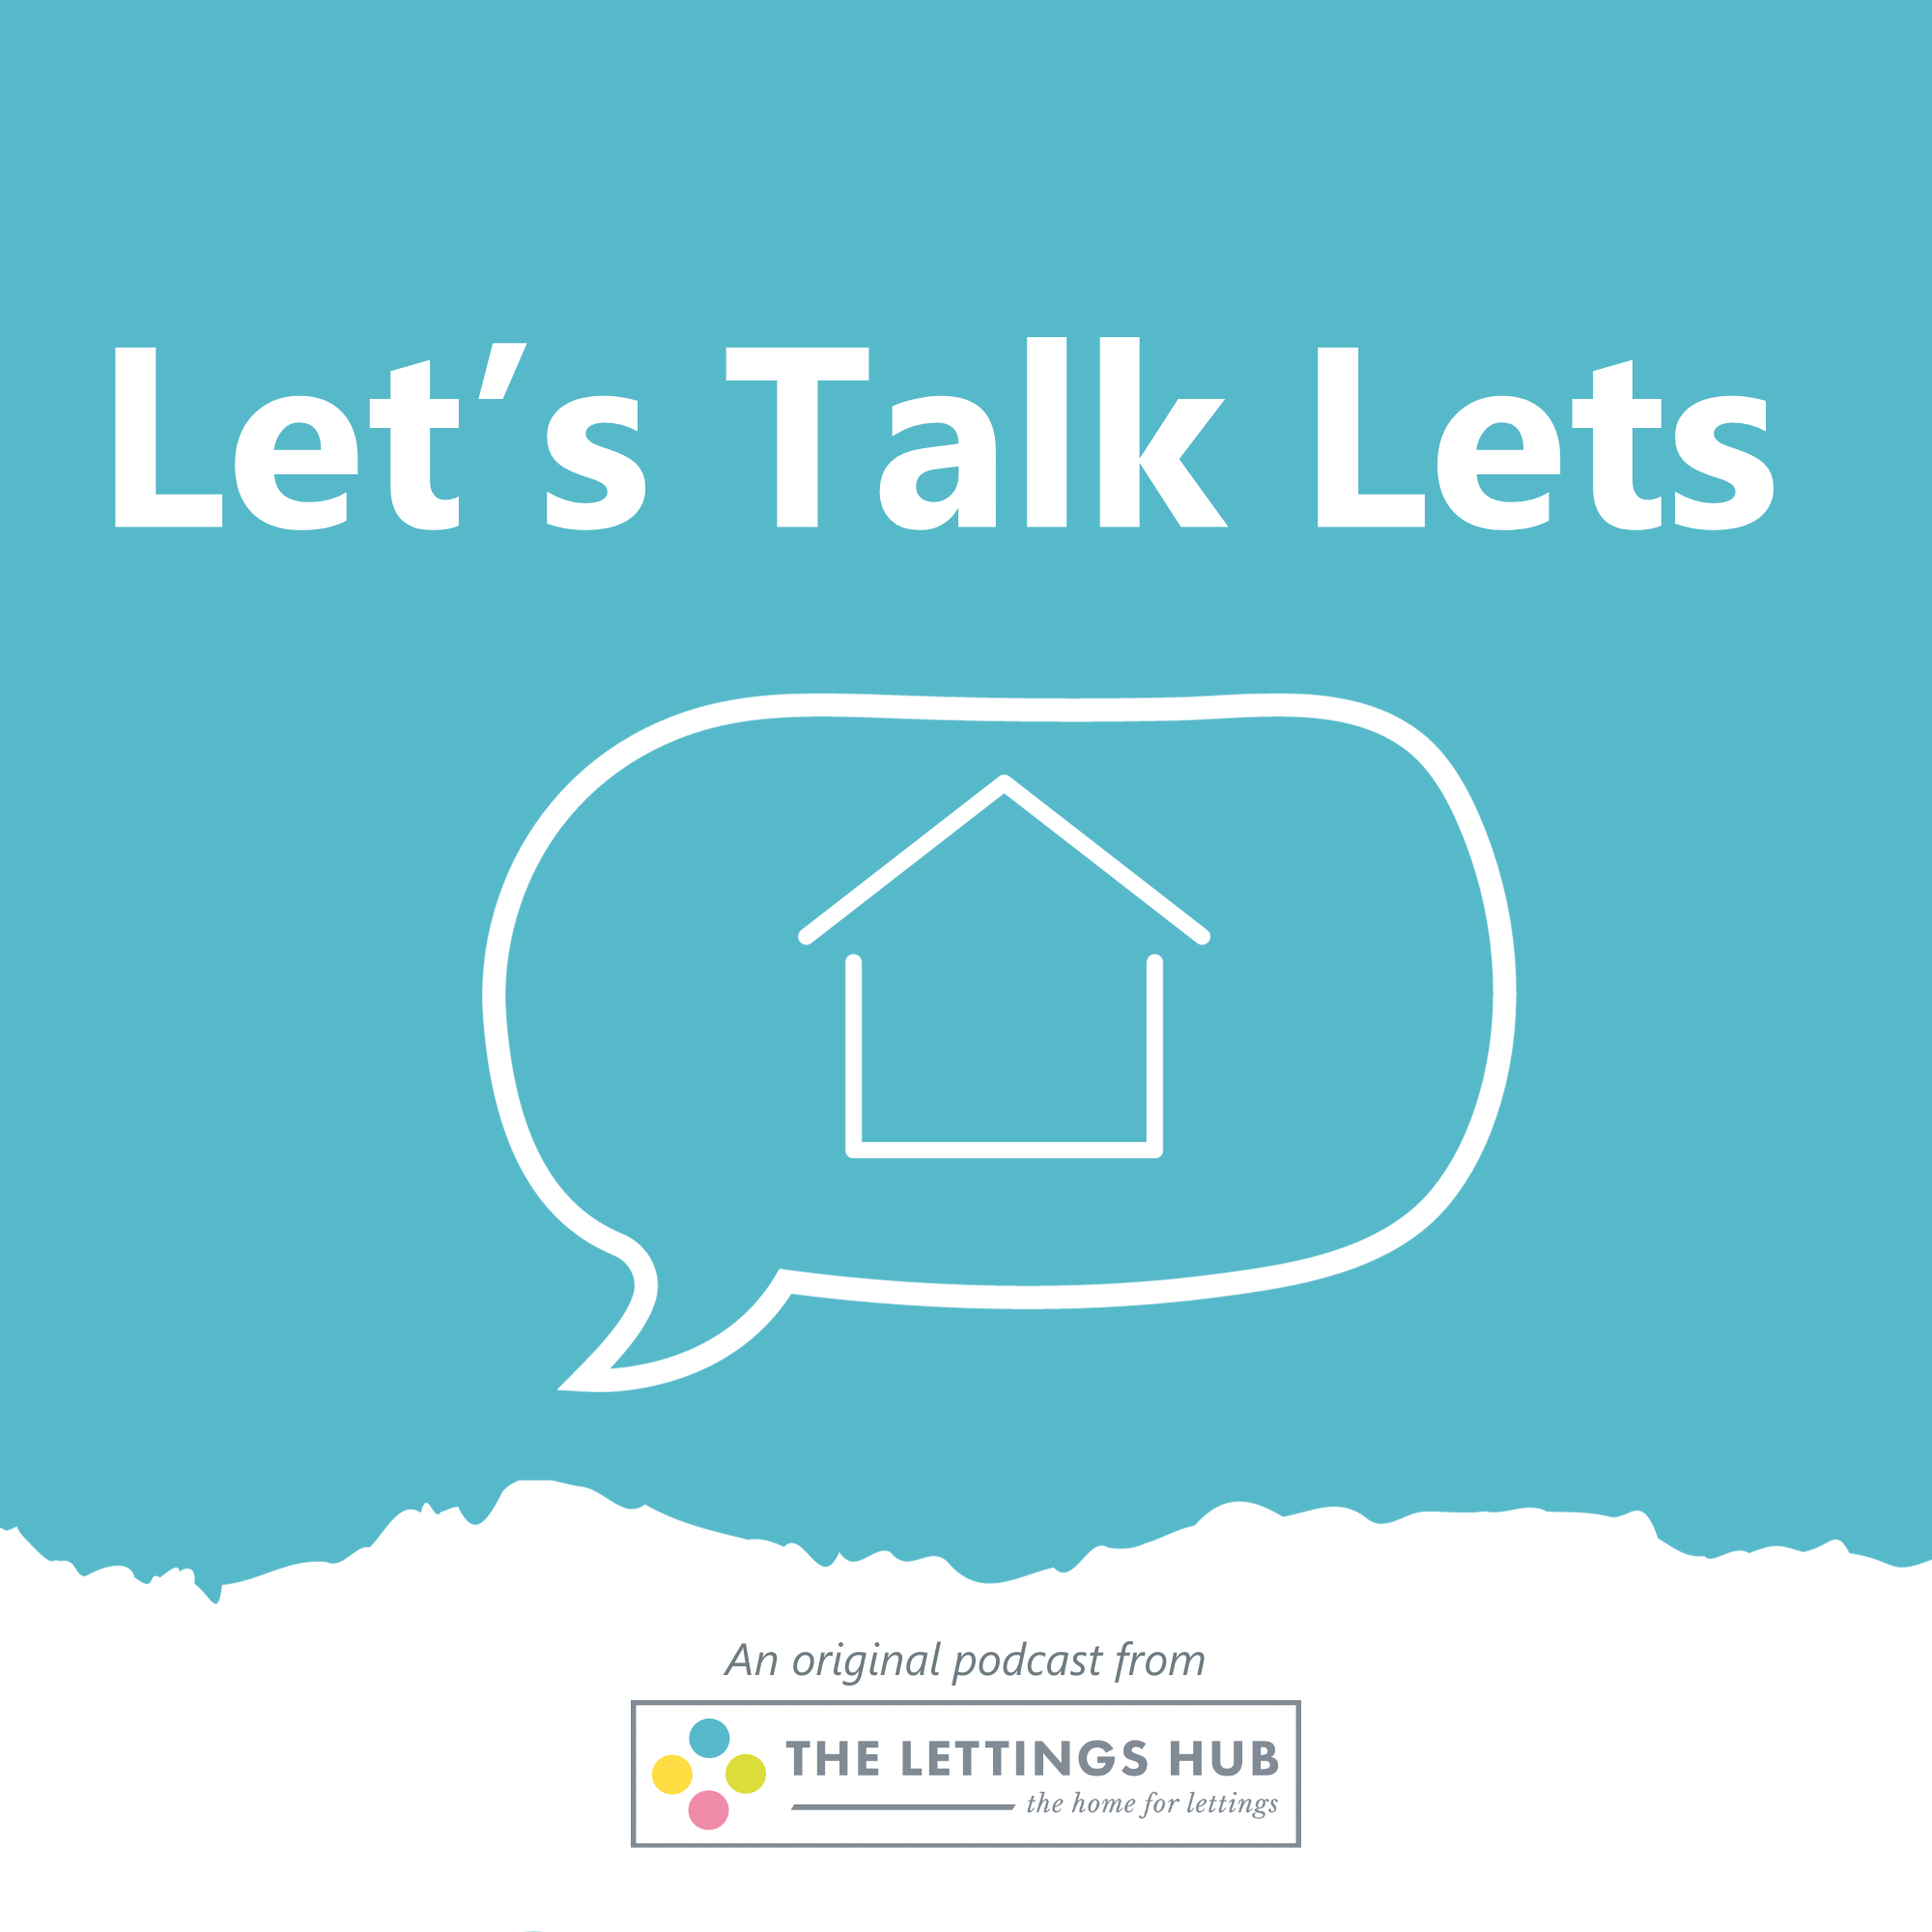 My Life in Lettings - With Sat Basi (Let's Talk Lets)